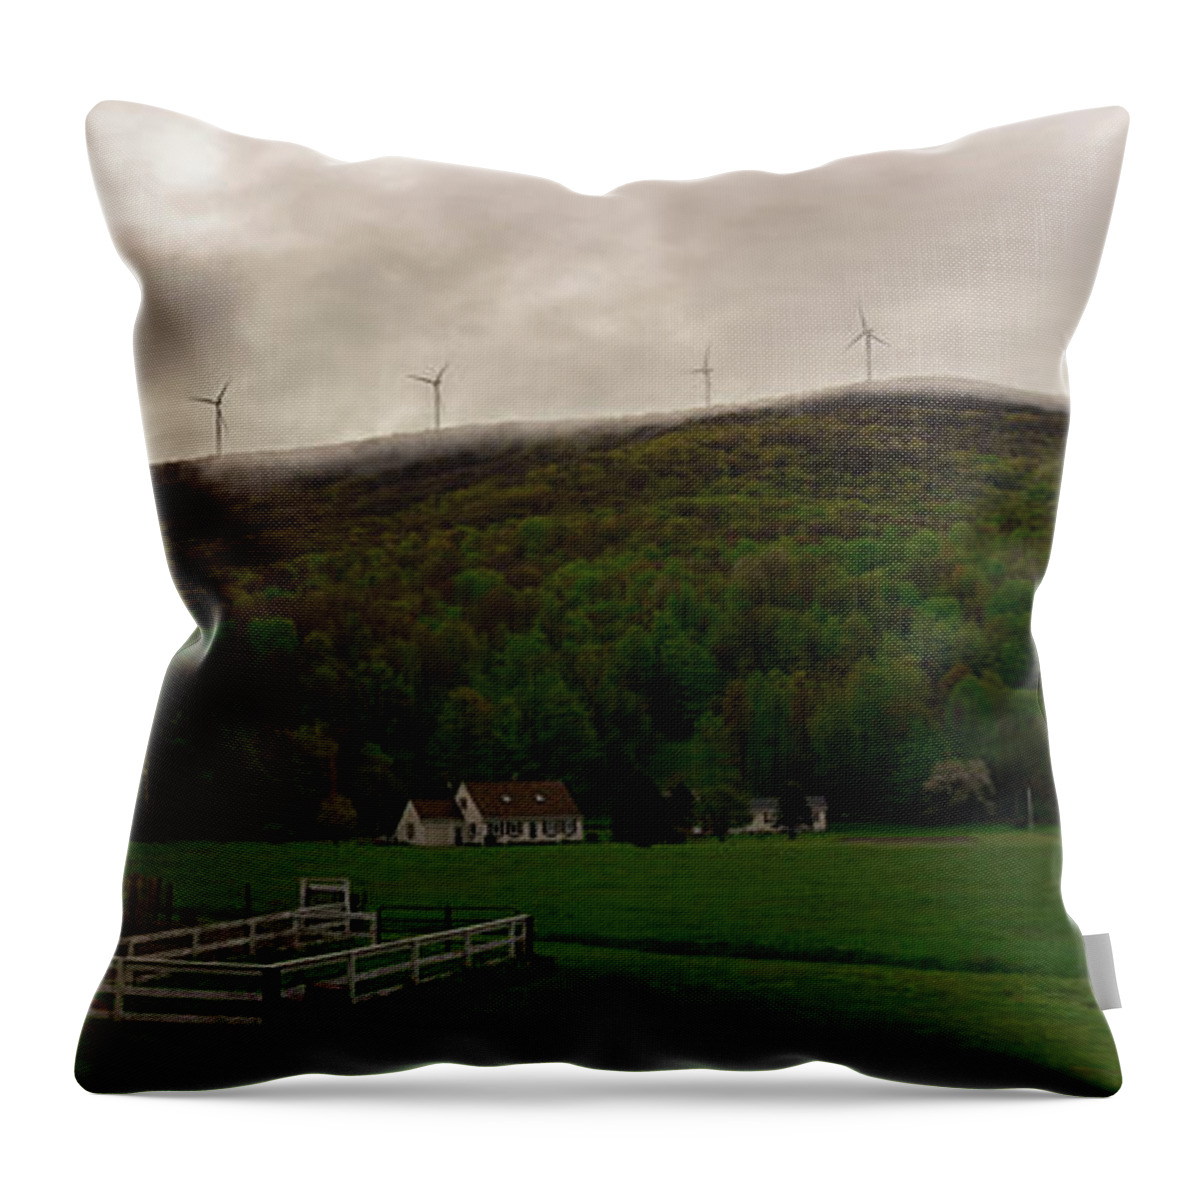 Wind Farm Throw Pillow featuring the photograph Wind Farm - Hancock Mass by Kirkodd Photography Of New England